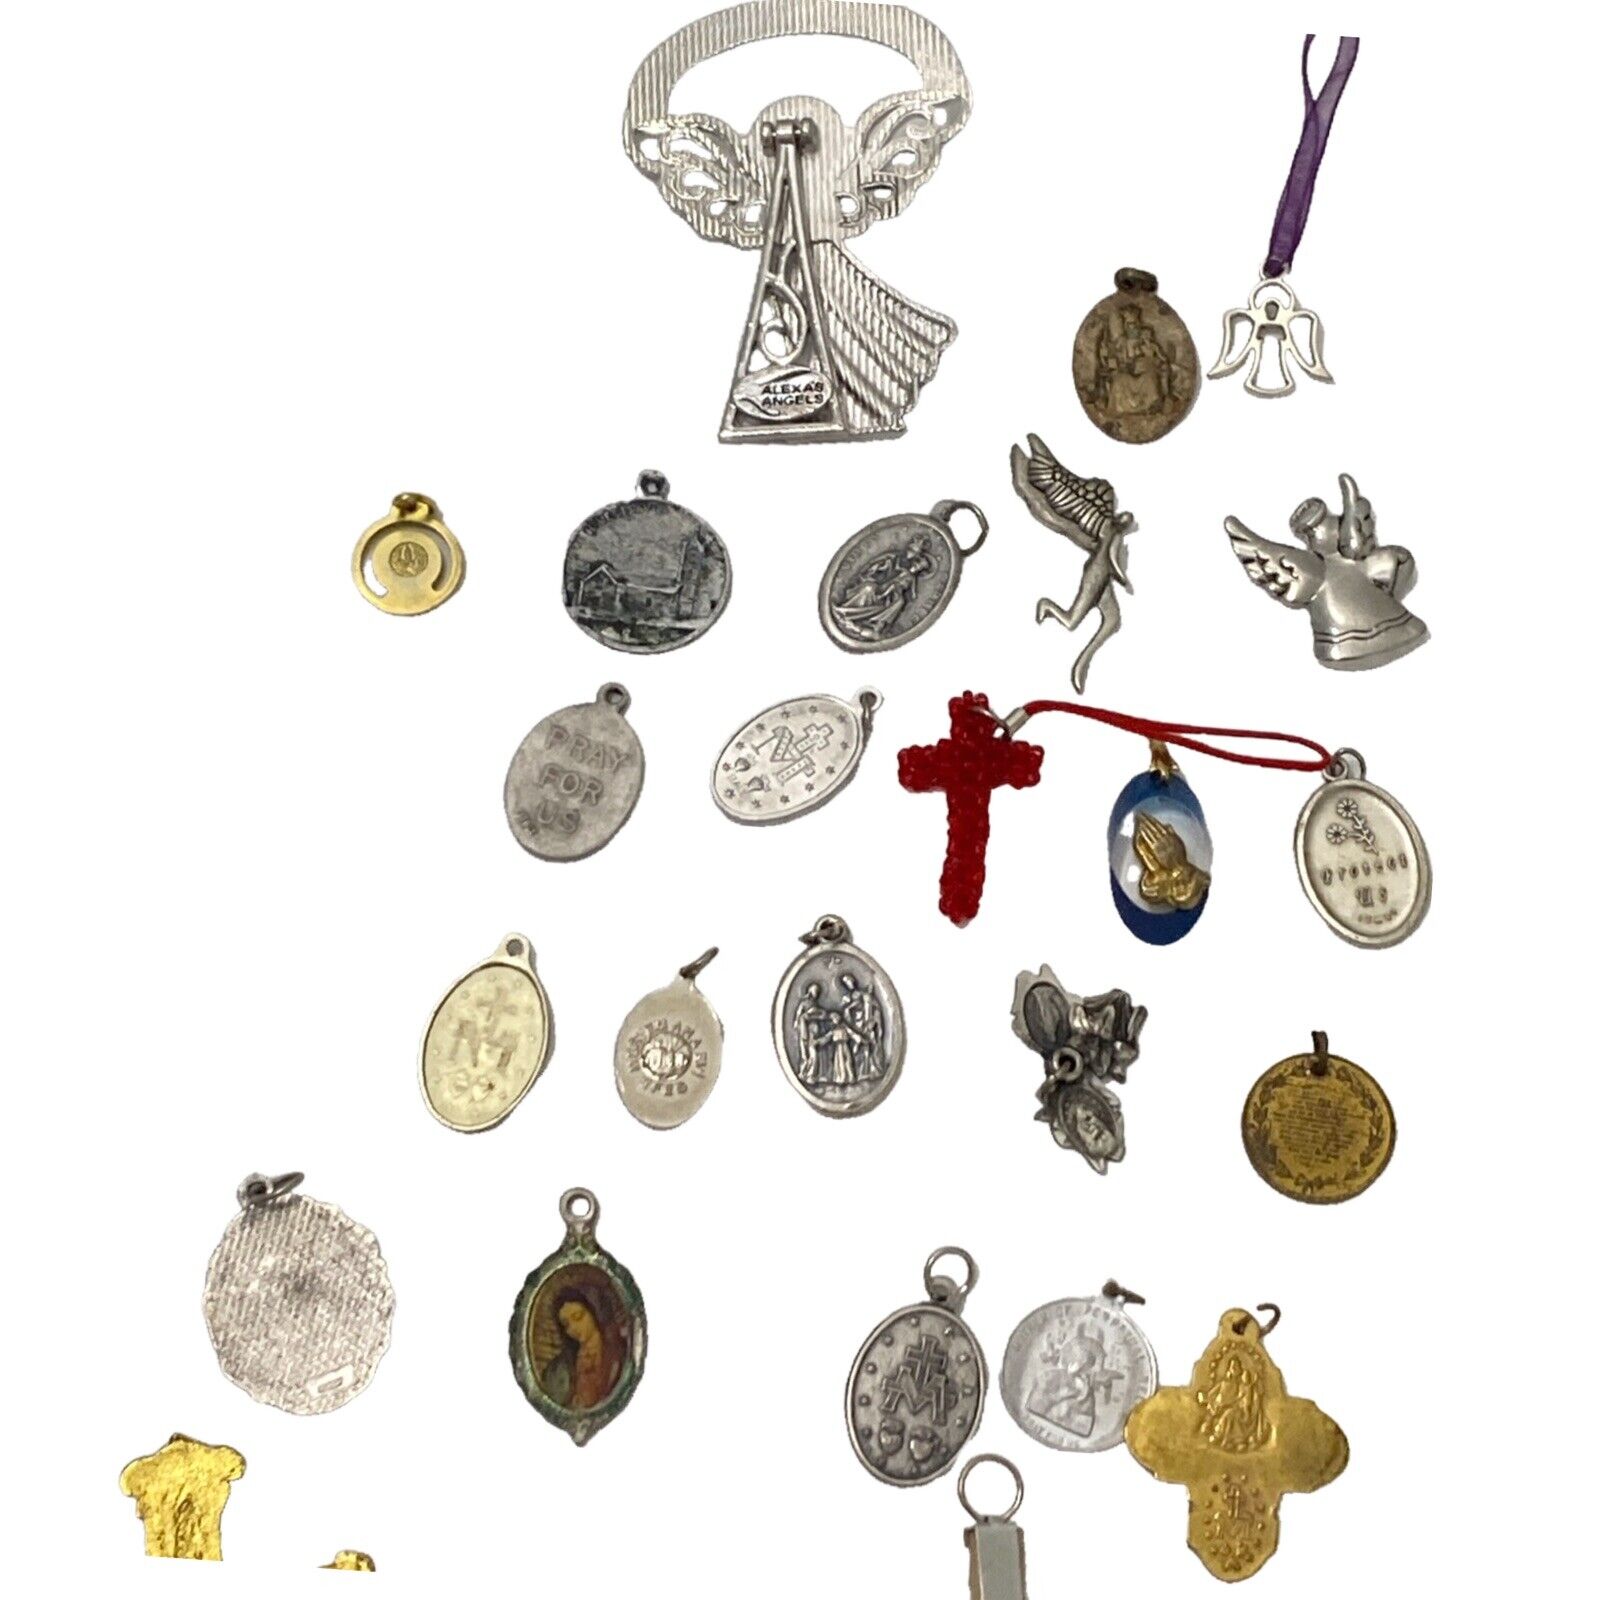 Vintage Catholic Religious Medals Charms Pendants Keychain Lot Mixed Metals